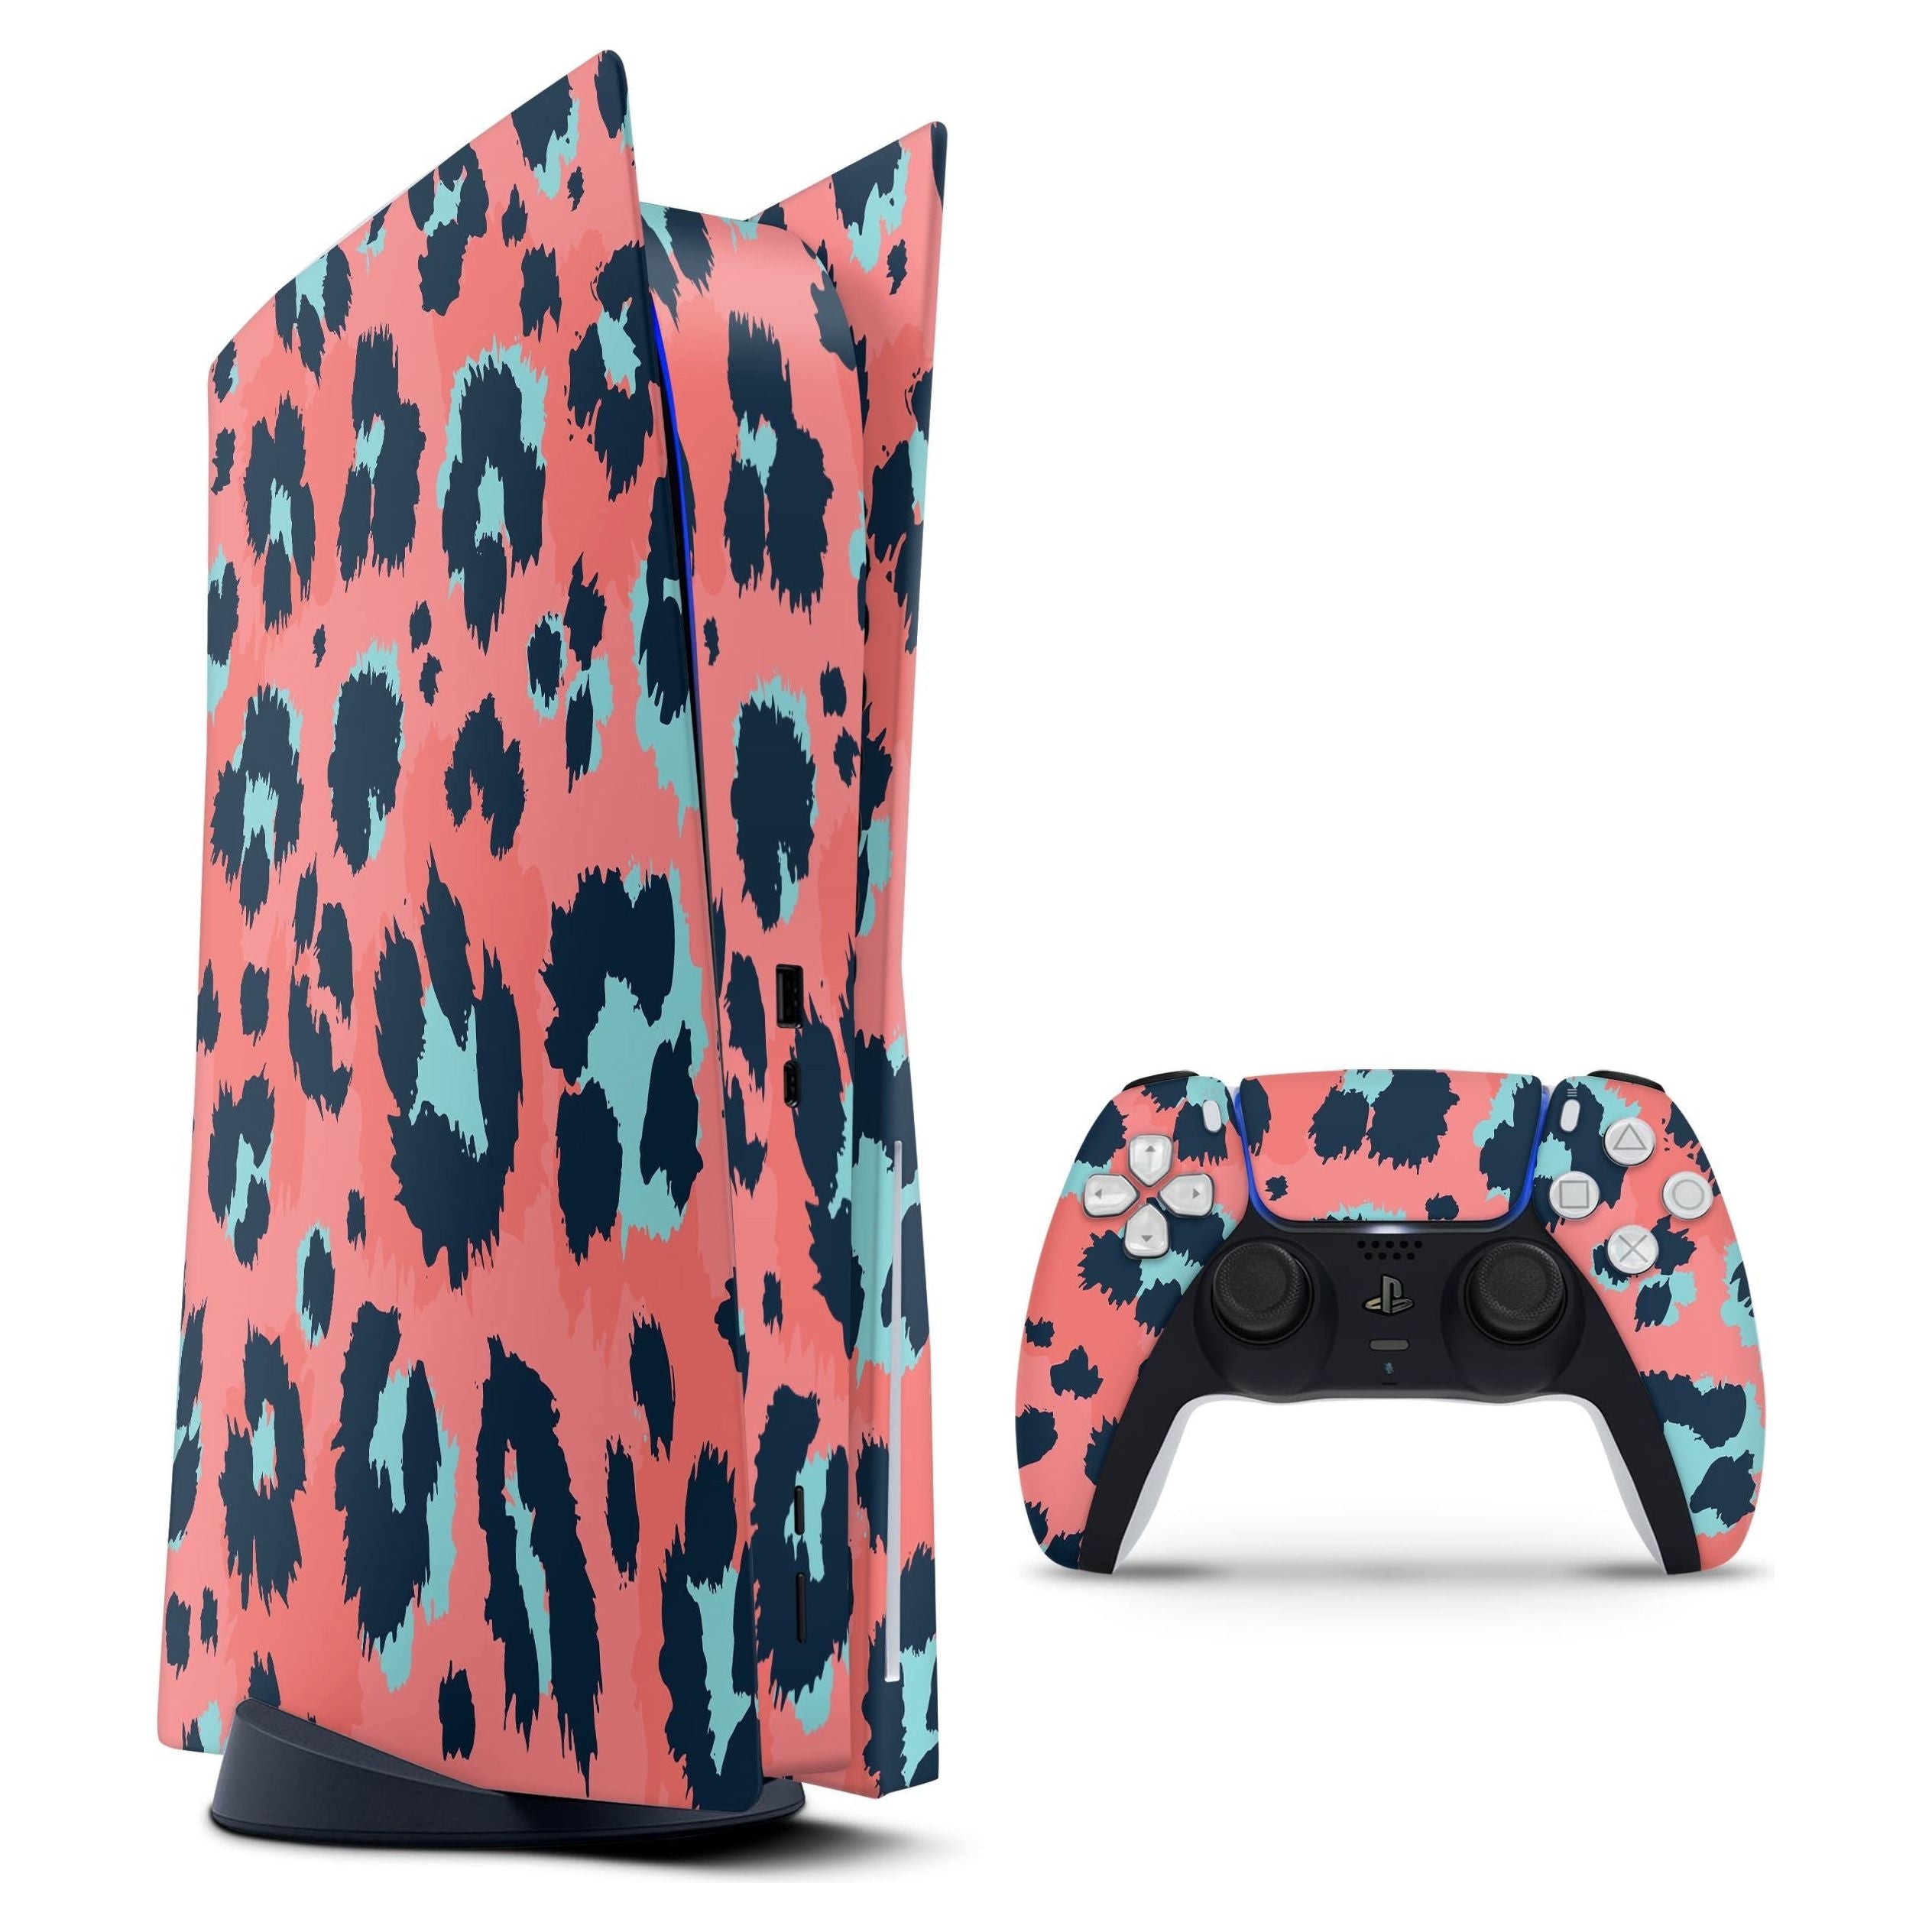 Leopard Coral and Teal - Full Vinyl decal Bundle for PlayStation 5